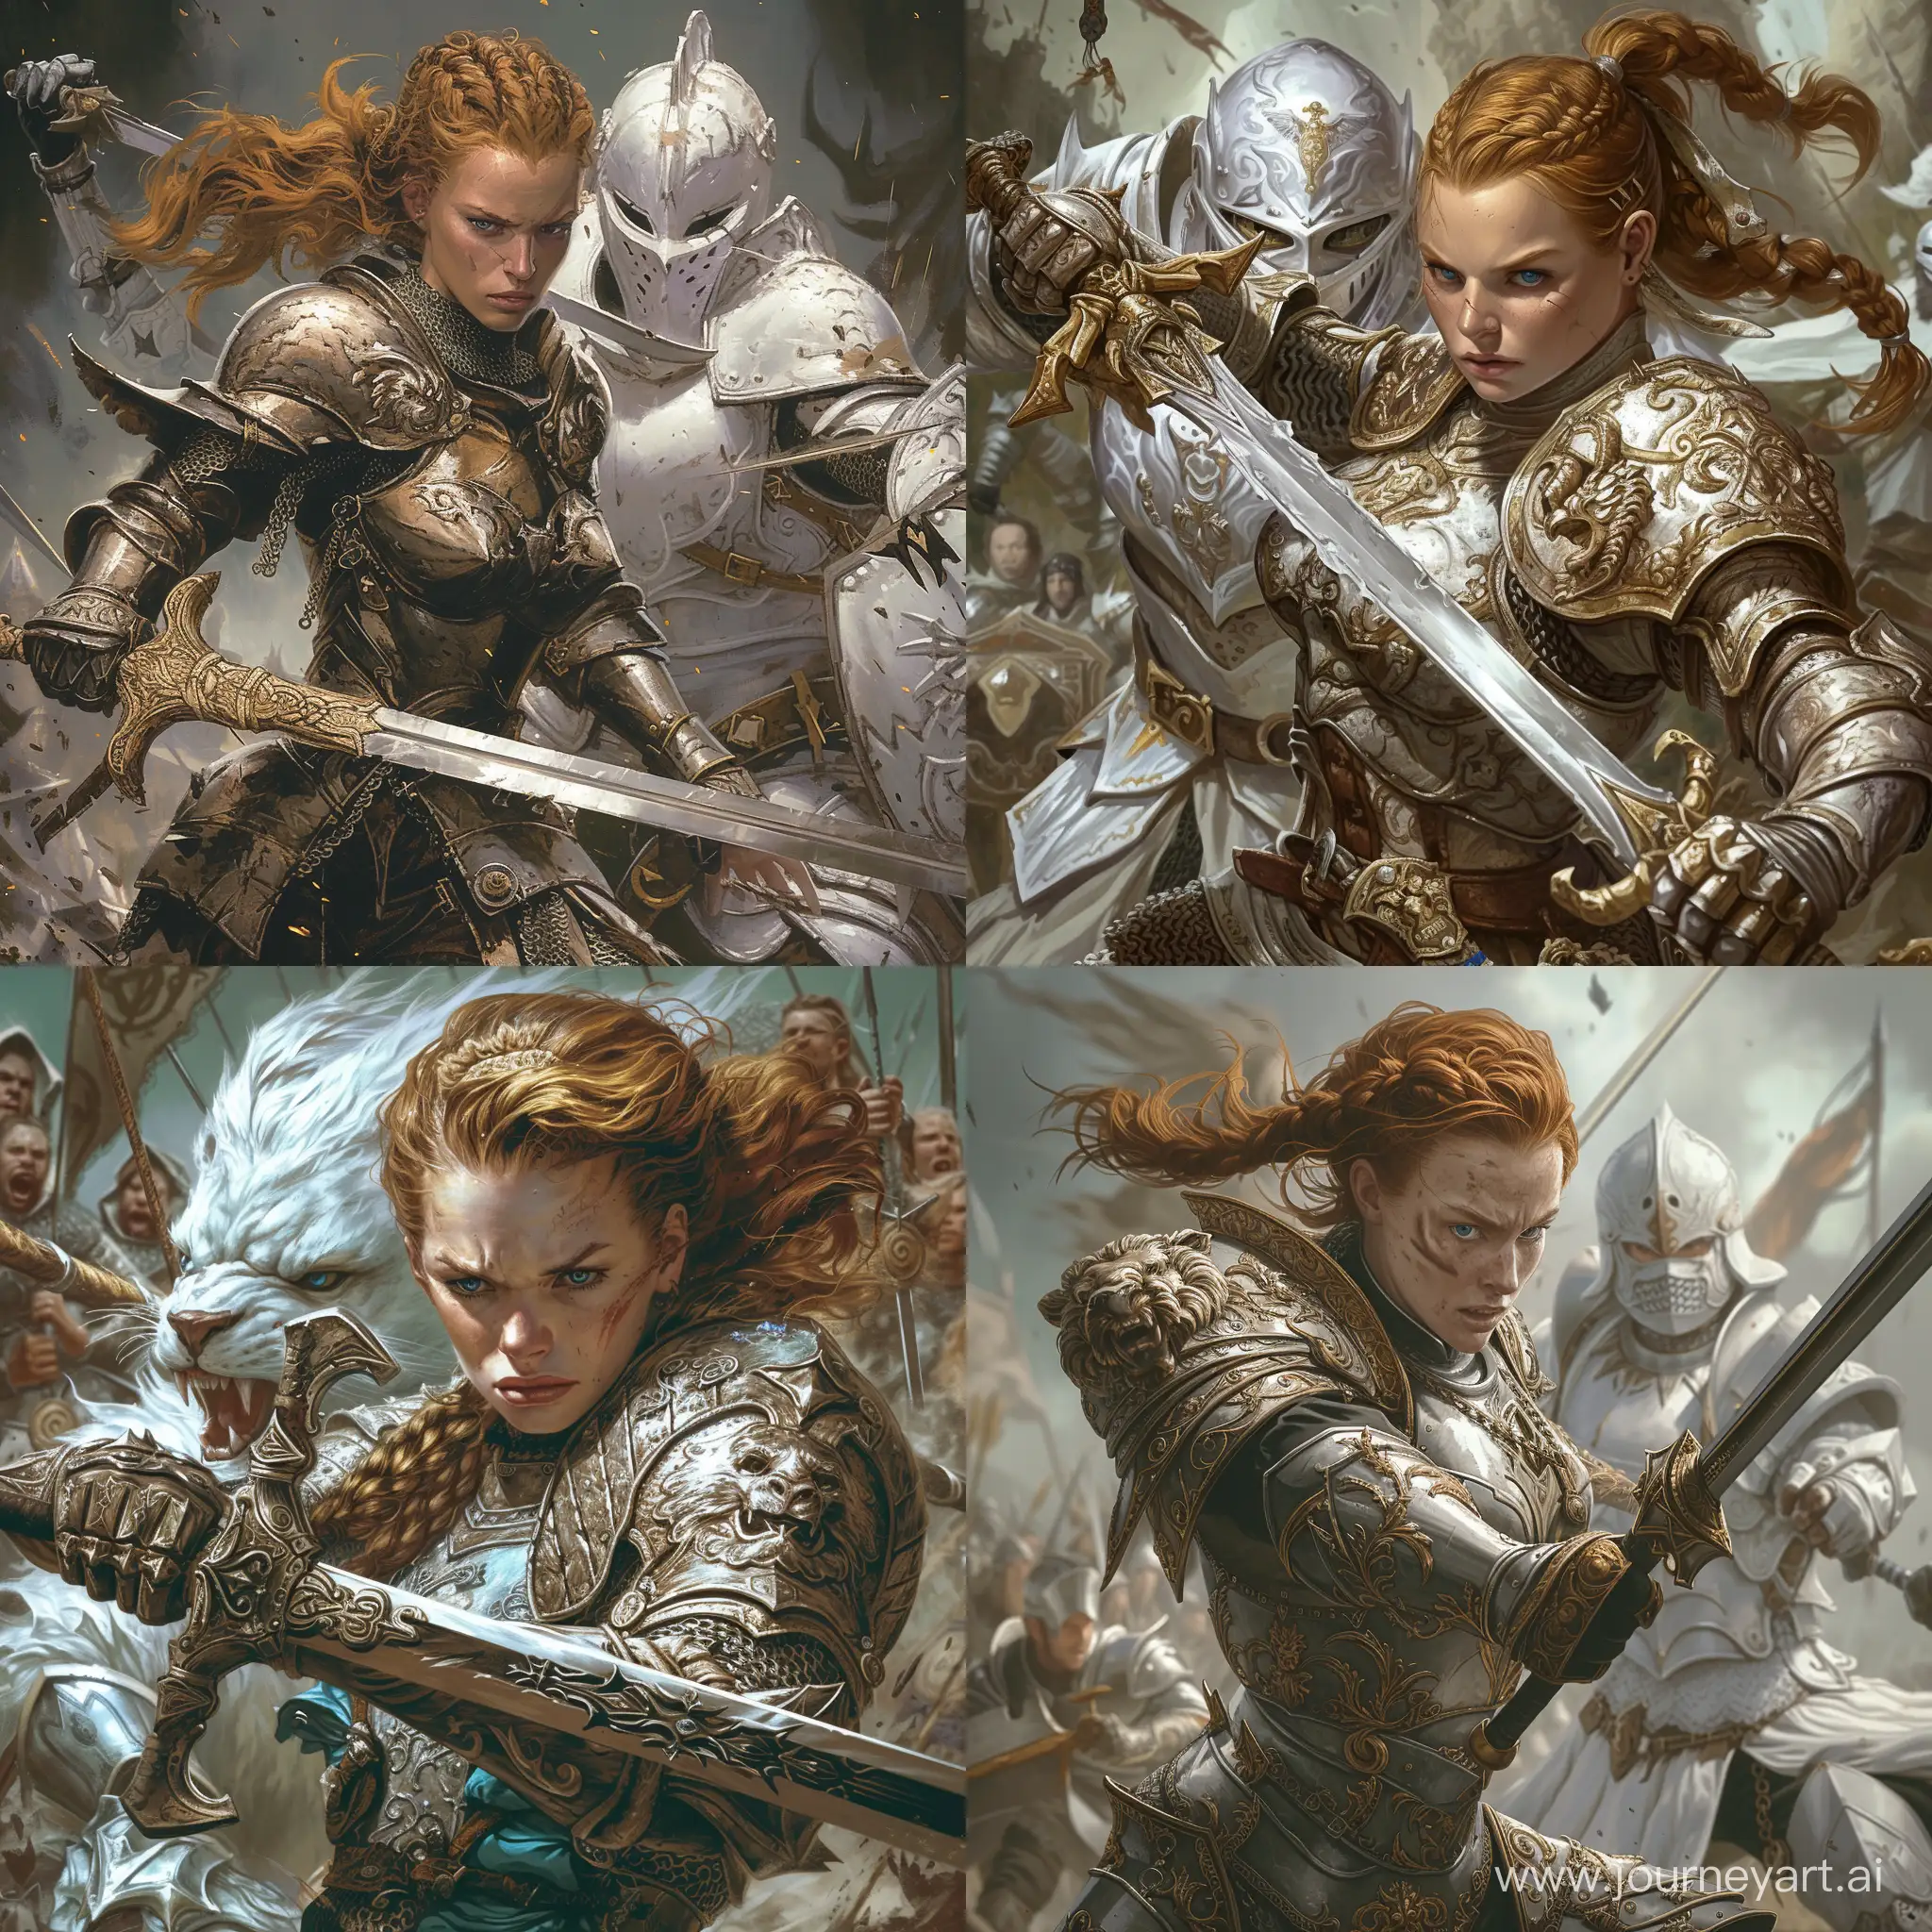 A fierce and beautiful stoic female knight with a reputation for unyielding resolve, Auburn hair tied in a tight braid and steel-blue eyes that reflect her unwavering determination, Wears a polished suit of ornate, silver-plated armor and wields a gleaming longsword with a hilt shaped like a roaring lion, accompanied by a knight wearing a white majestic armor, wield a sword, fighting in the middle of a battlefield, 1970's dark fantasy style, grim dark, gritty, detailed